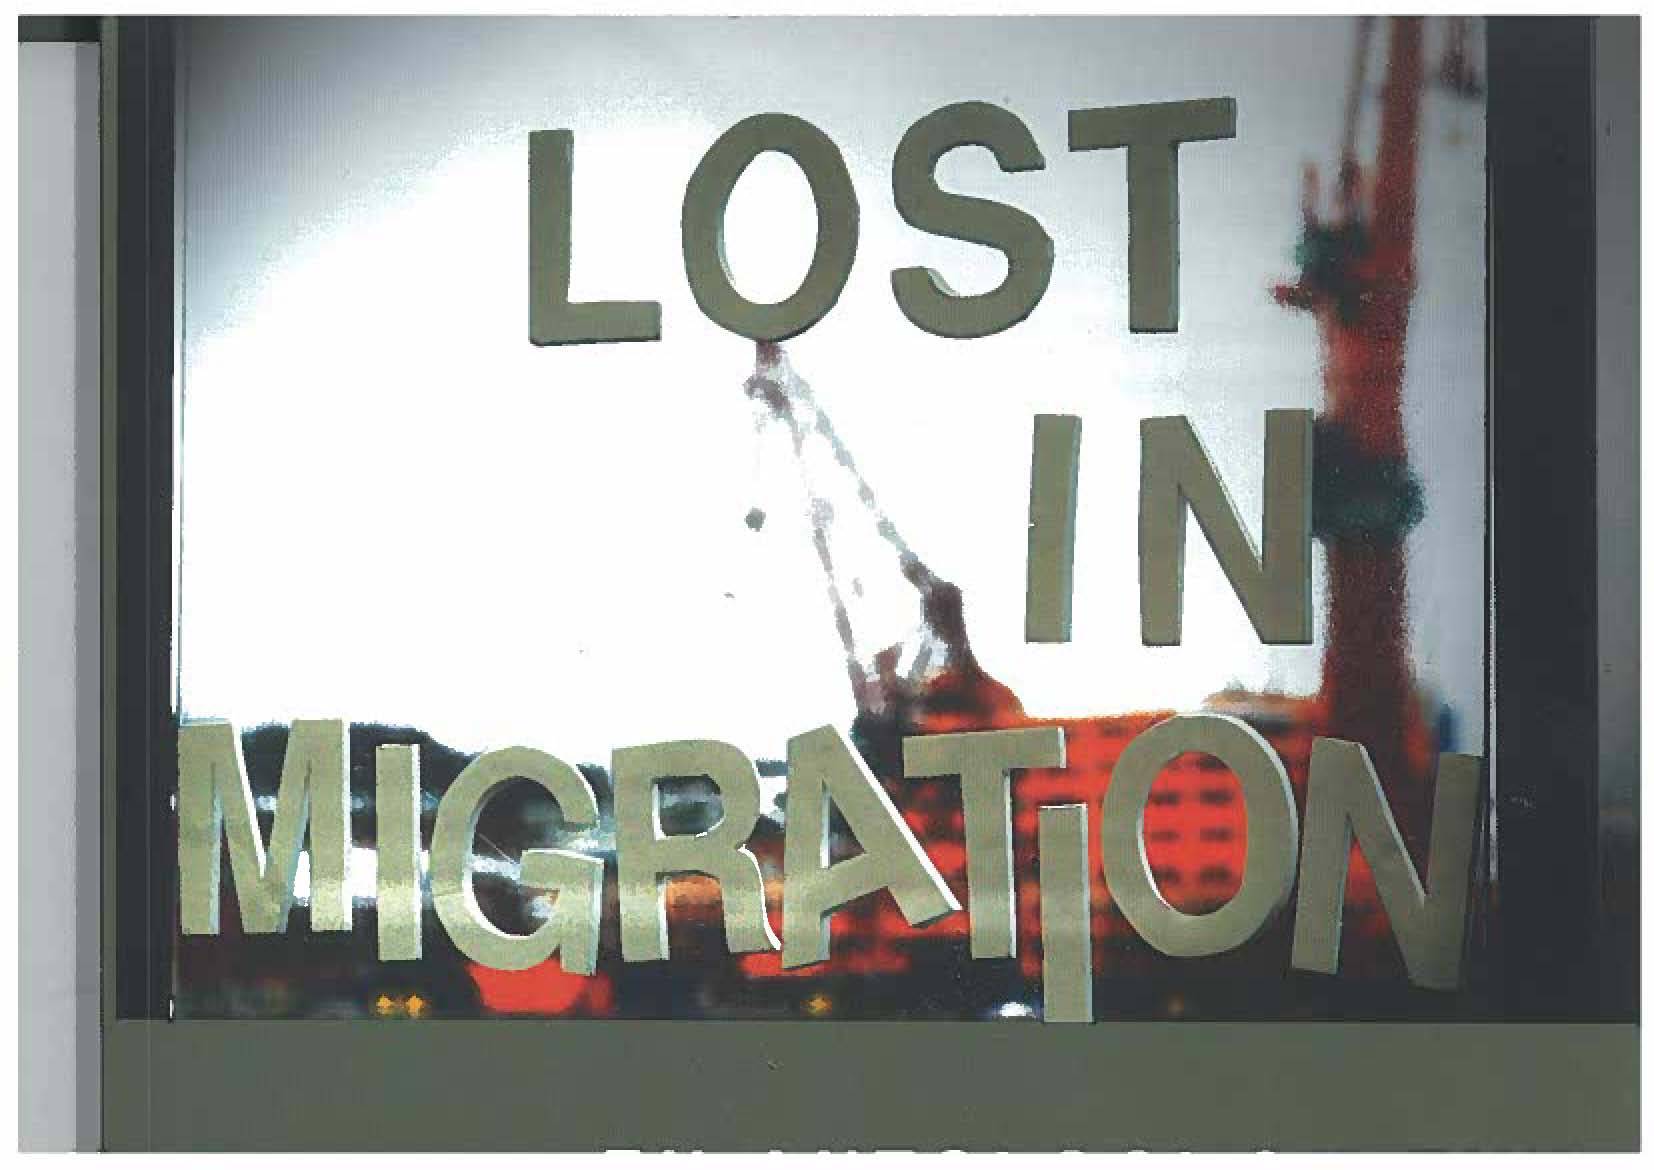 Lost in migration